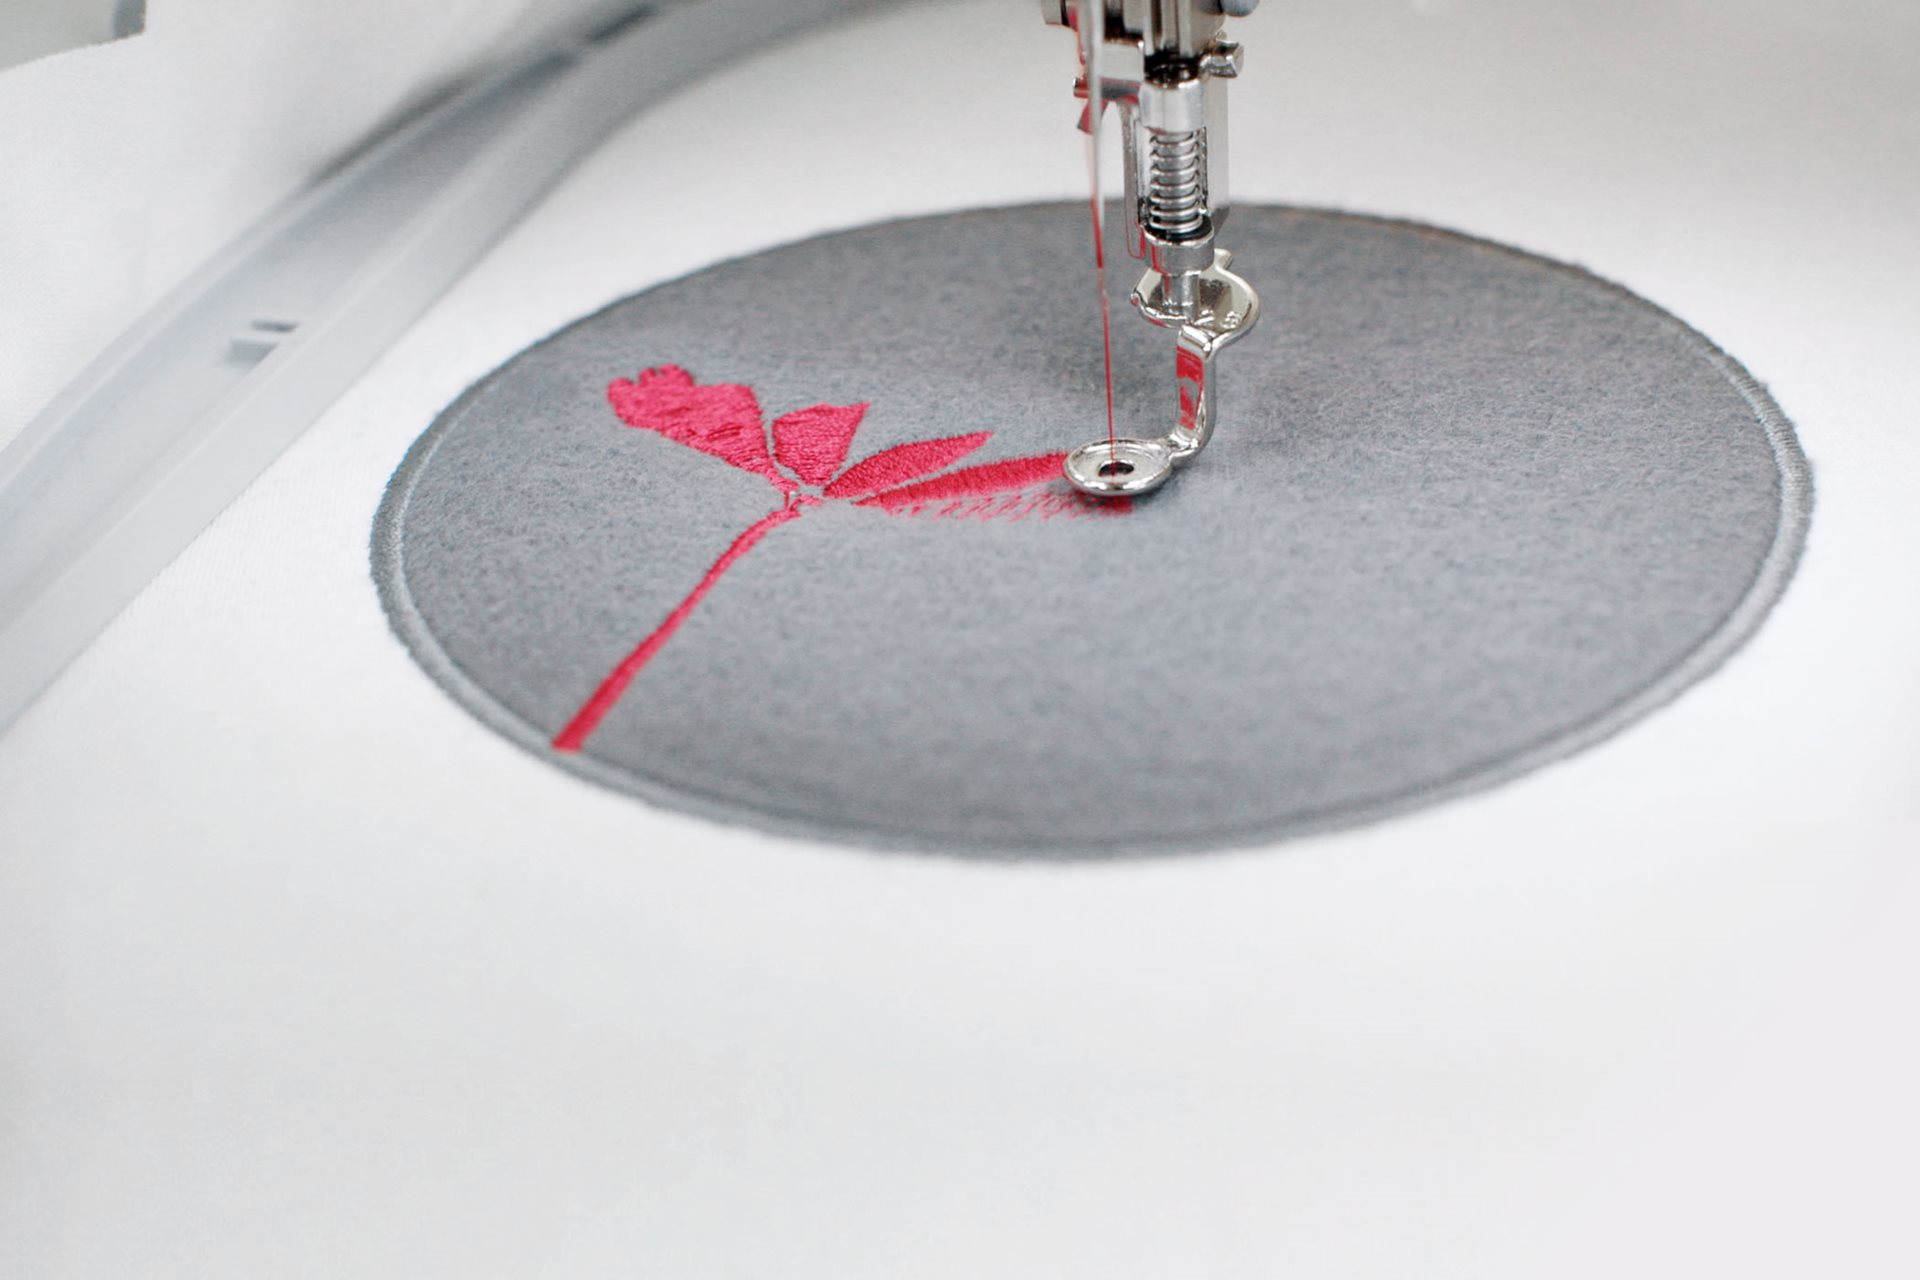 Embroidery software lessons